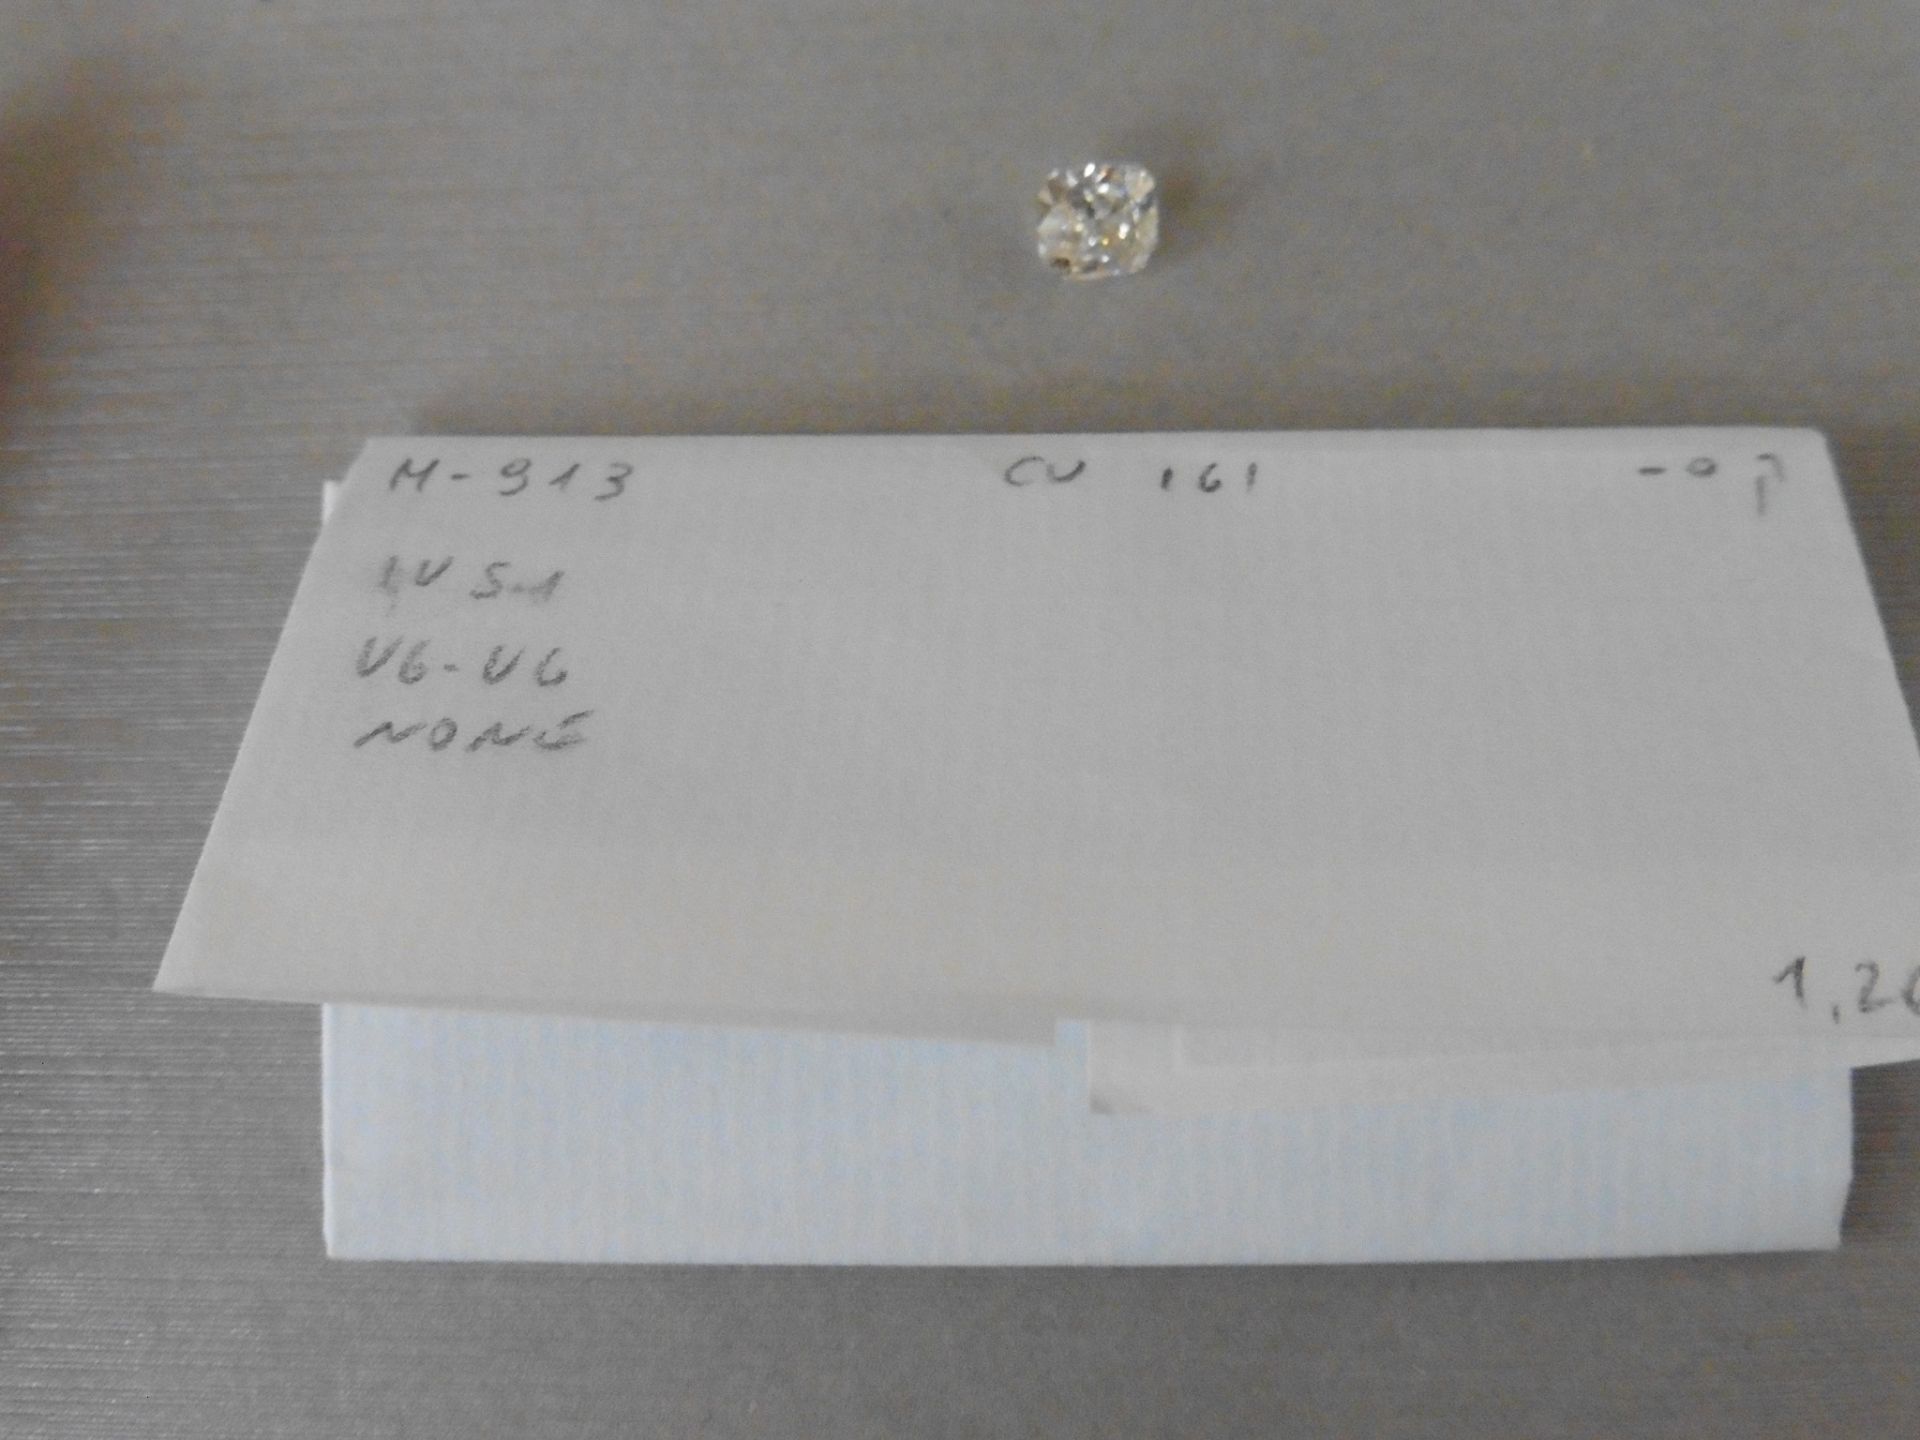 1.00ct single emerald cut diamond G colour VS1 clarity. 6.74 x 4.76 x 3.18. Suitable for mounting in - Image 5 of 5